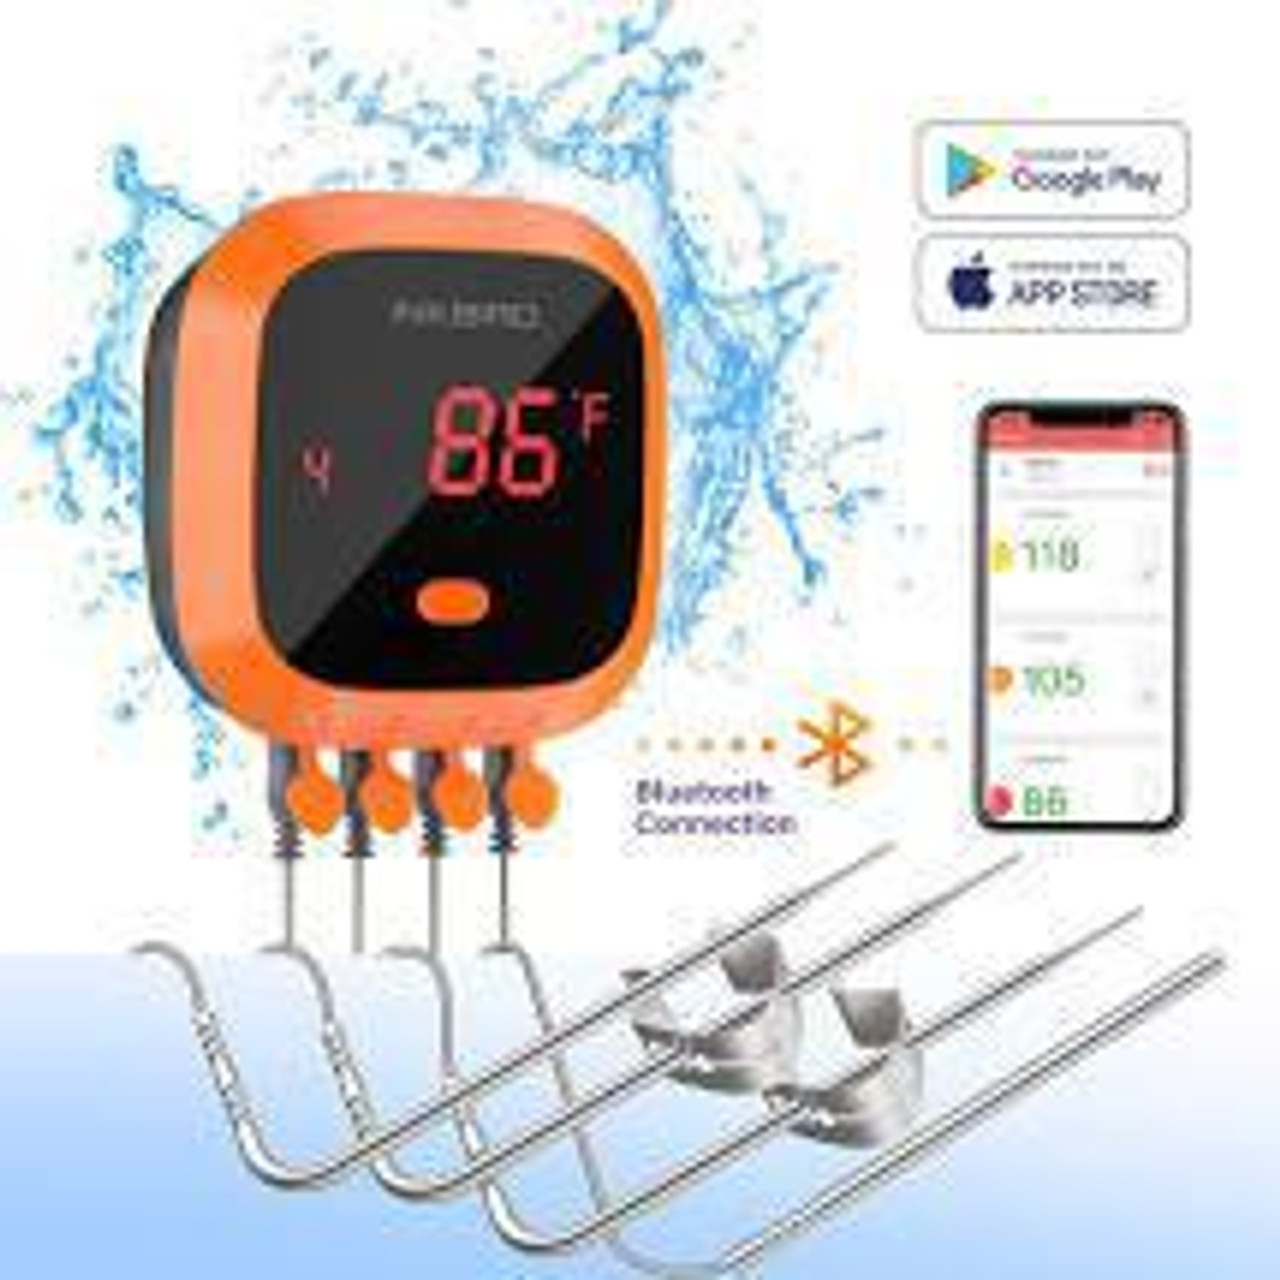 Detailed Inkbird IBBQ-4T WIFI Thermometer Review 